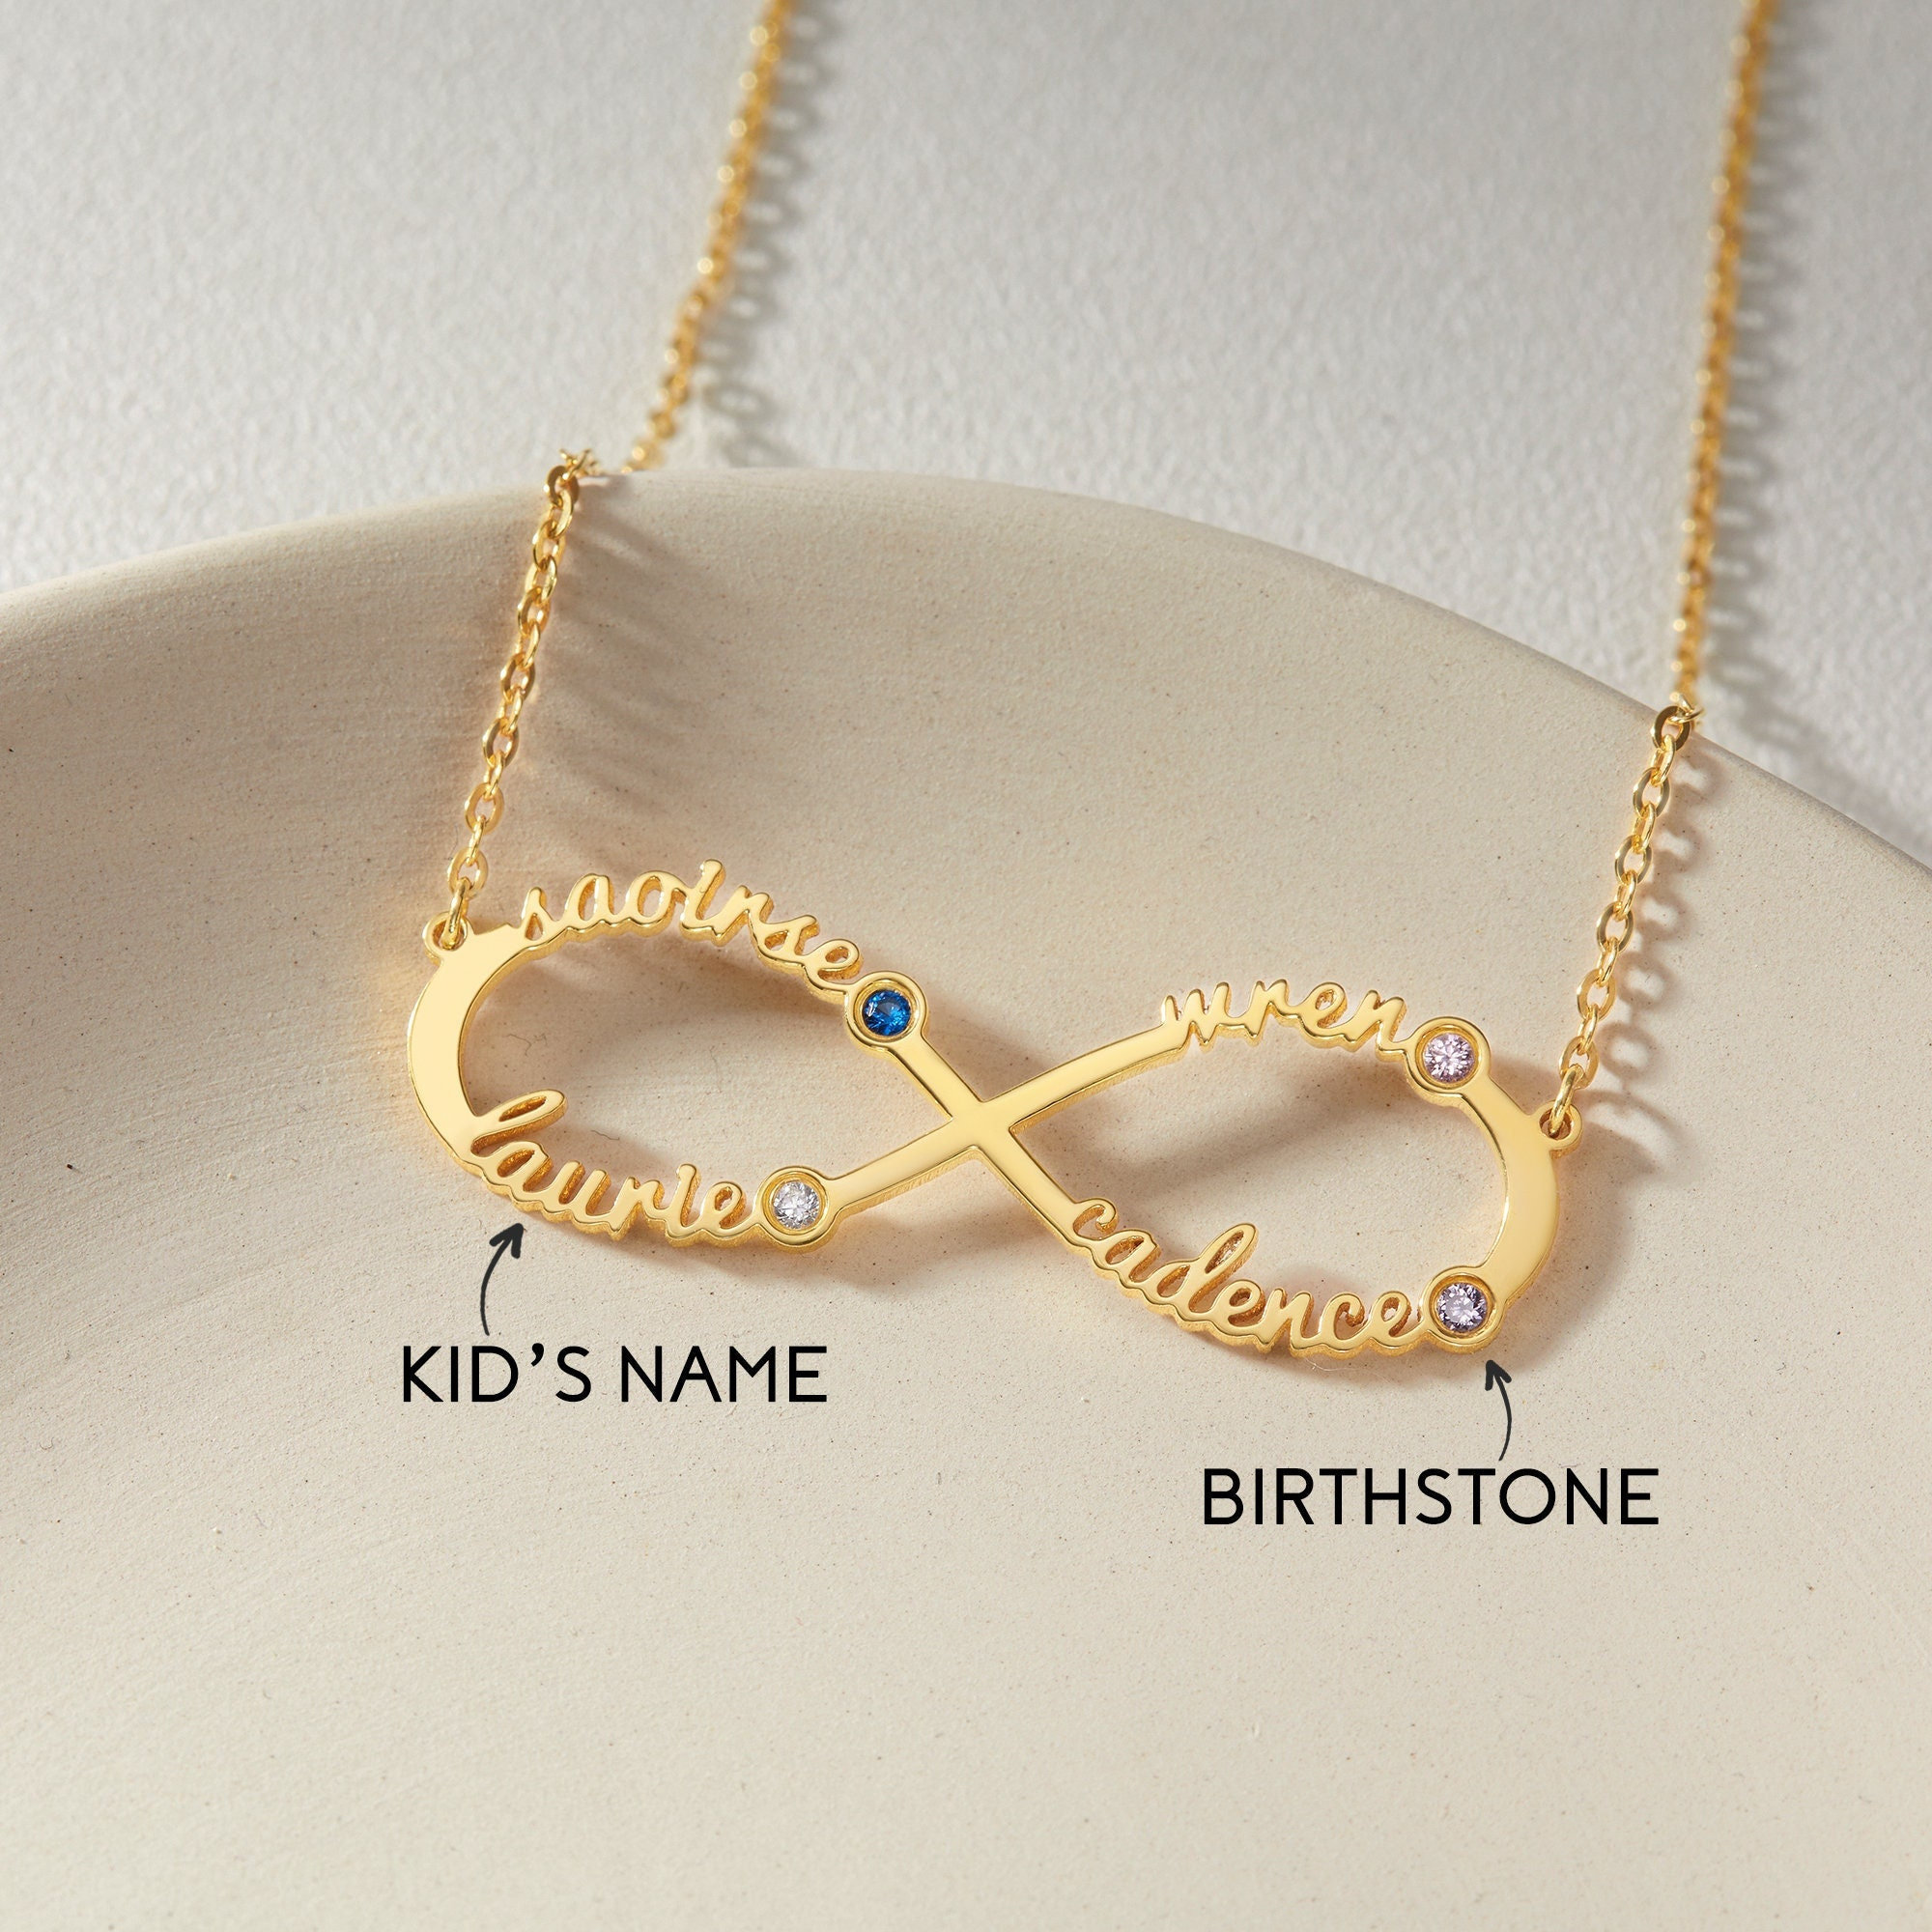 Personalized Infinity Mom Kids Name Birthstone Necklace